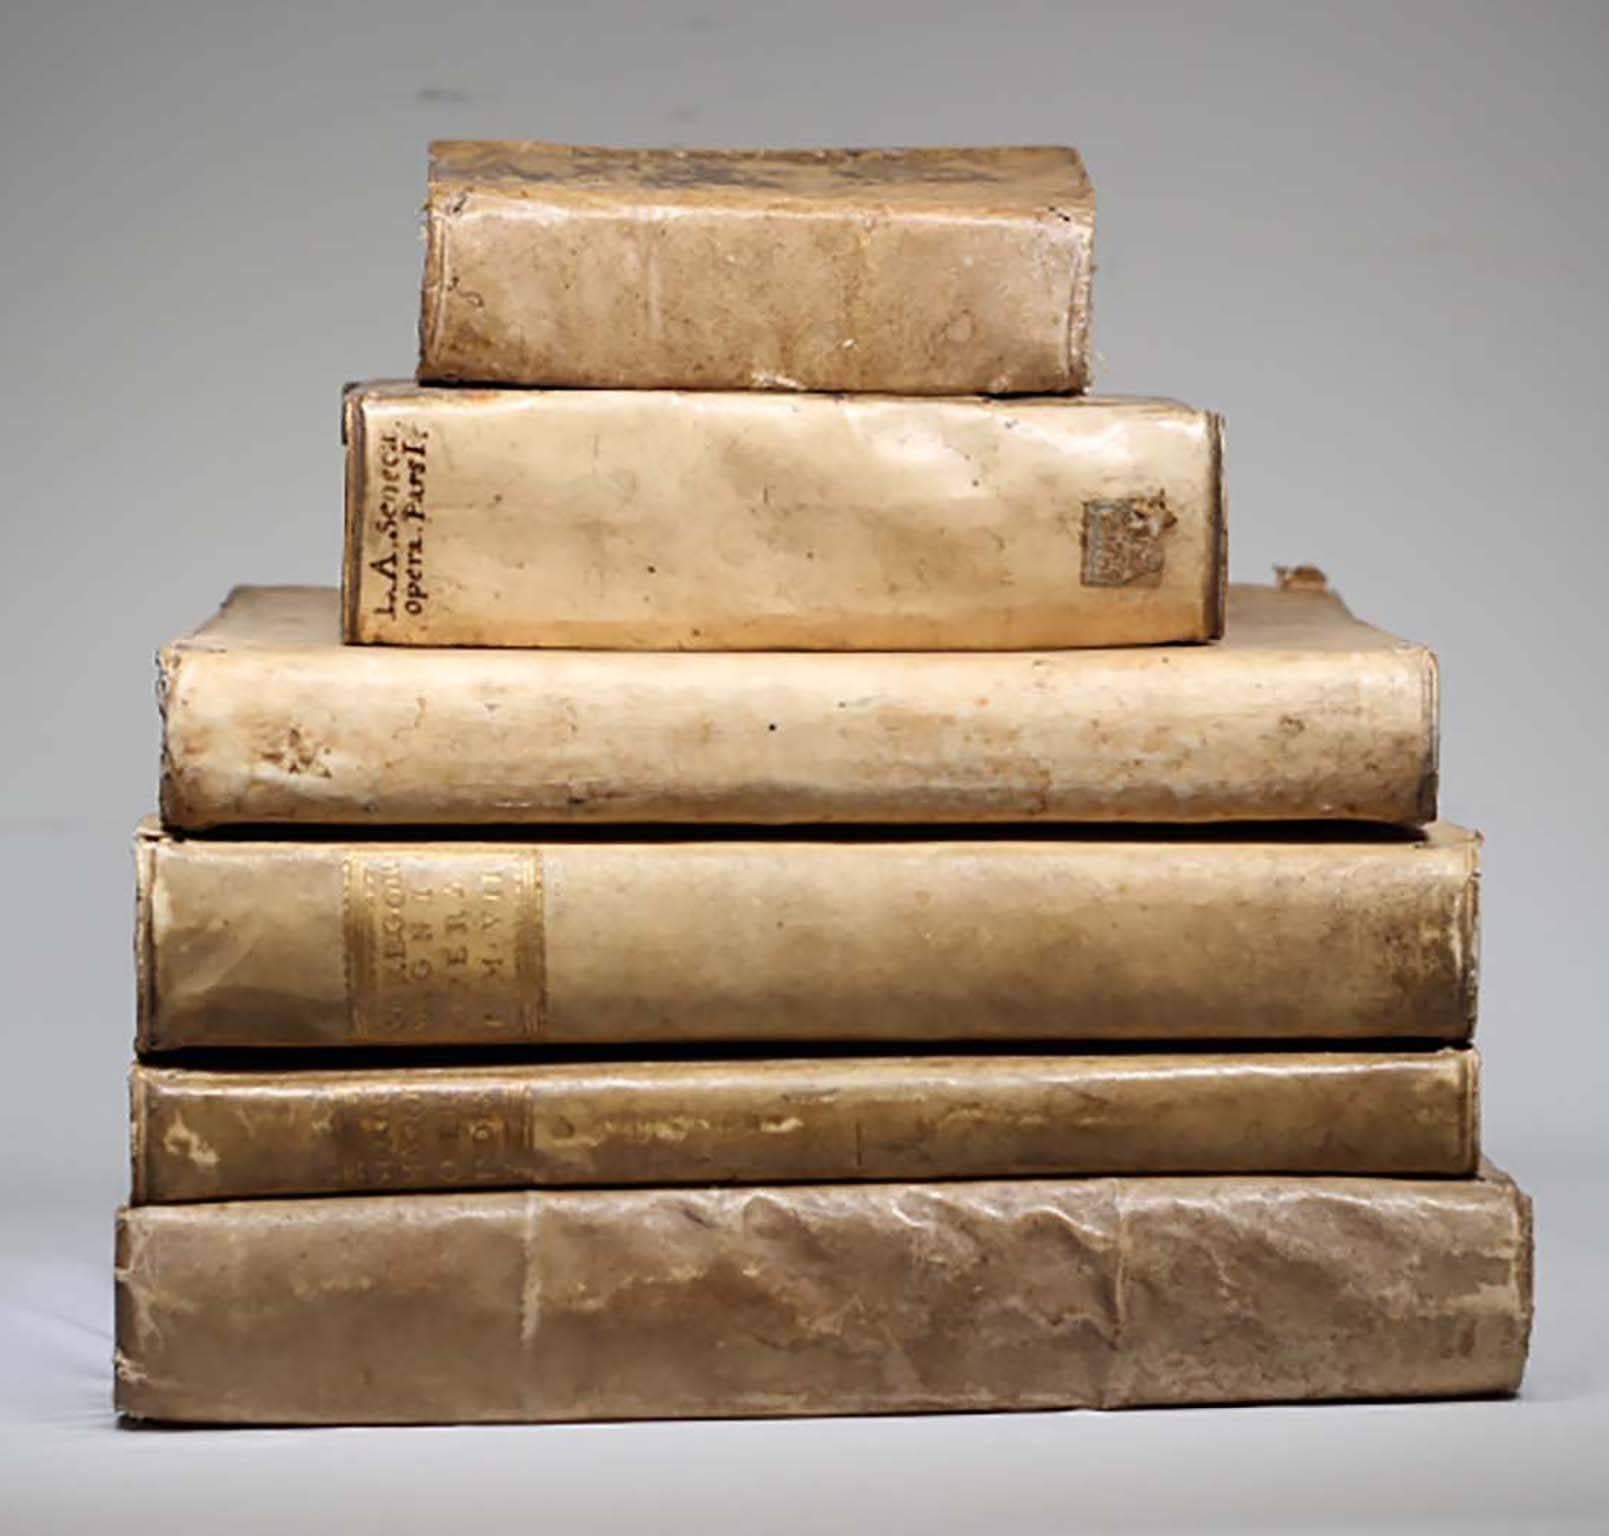 BOOKS MAY BE PURCHASED SEPARATELY 

Collection of 18th century pig vellum books all written in Latin.
Prices and dimensions are as follows: 
Measures:
Image 3: "L. Annaei Senecae M. F. Pholosophi et al." Possibly, circa 1629.
7.75" x